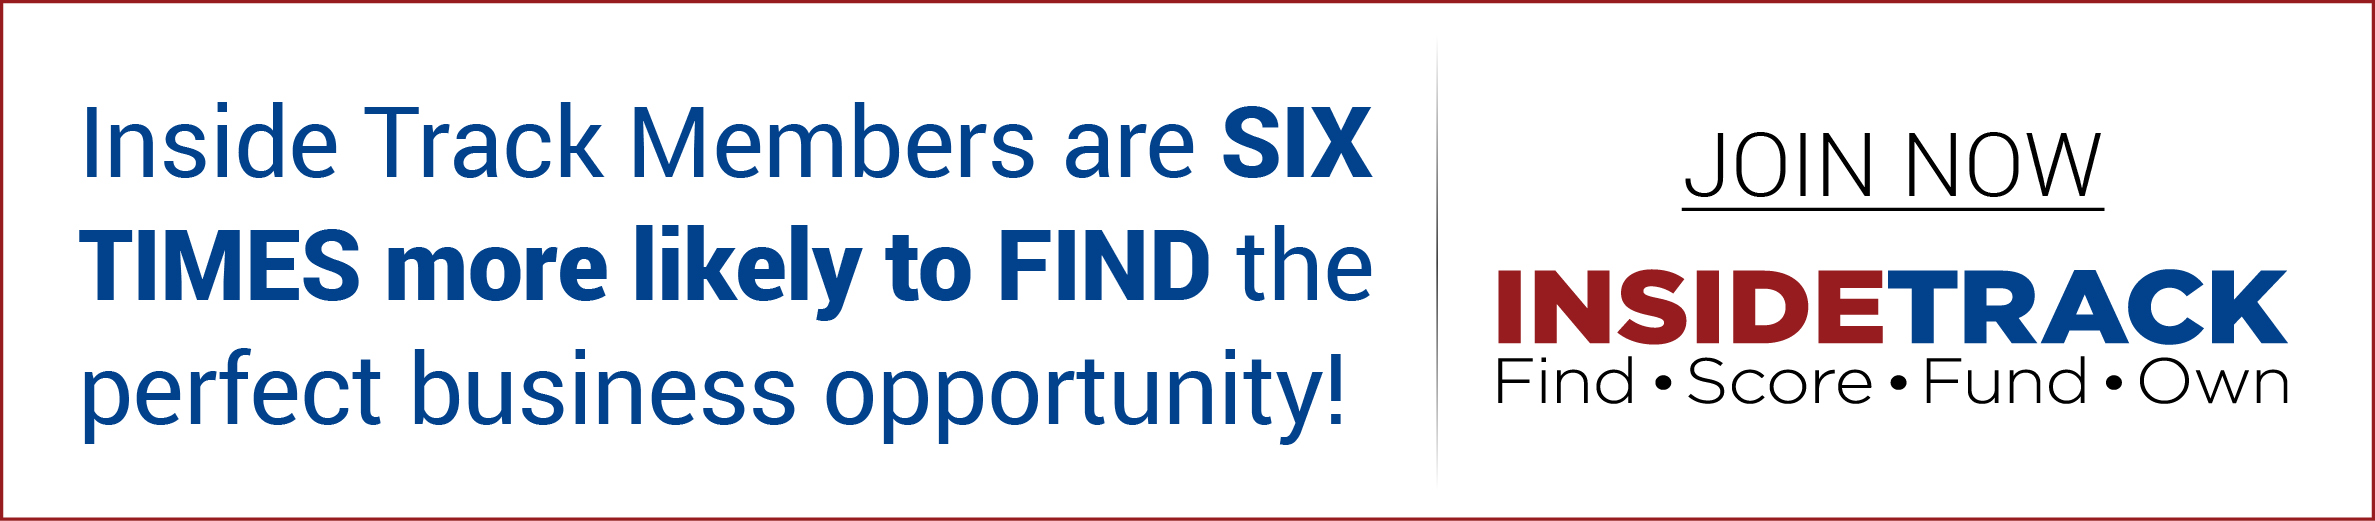 Inside track members are six times more likely to find the perfect business opportunity!